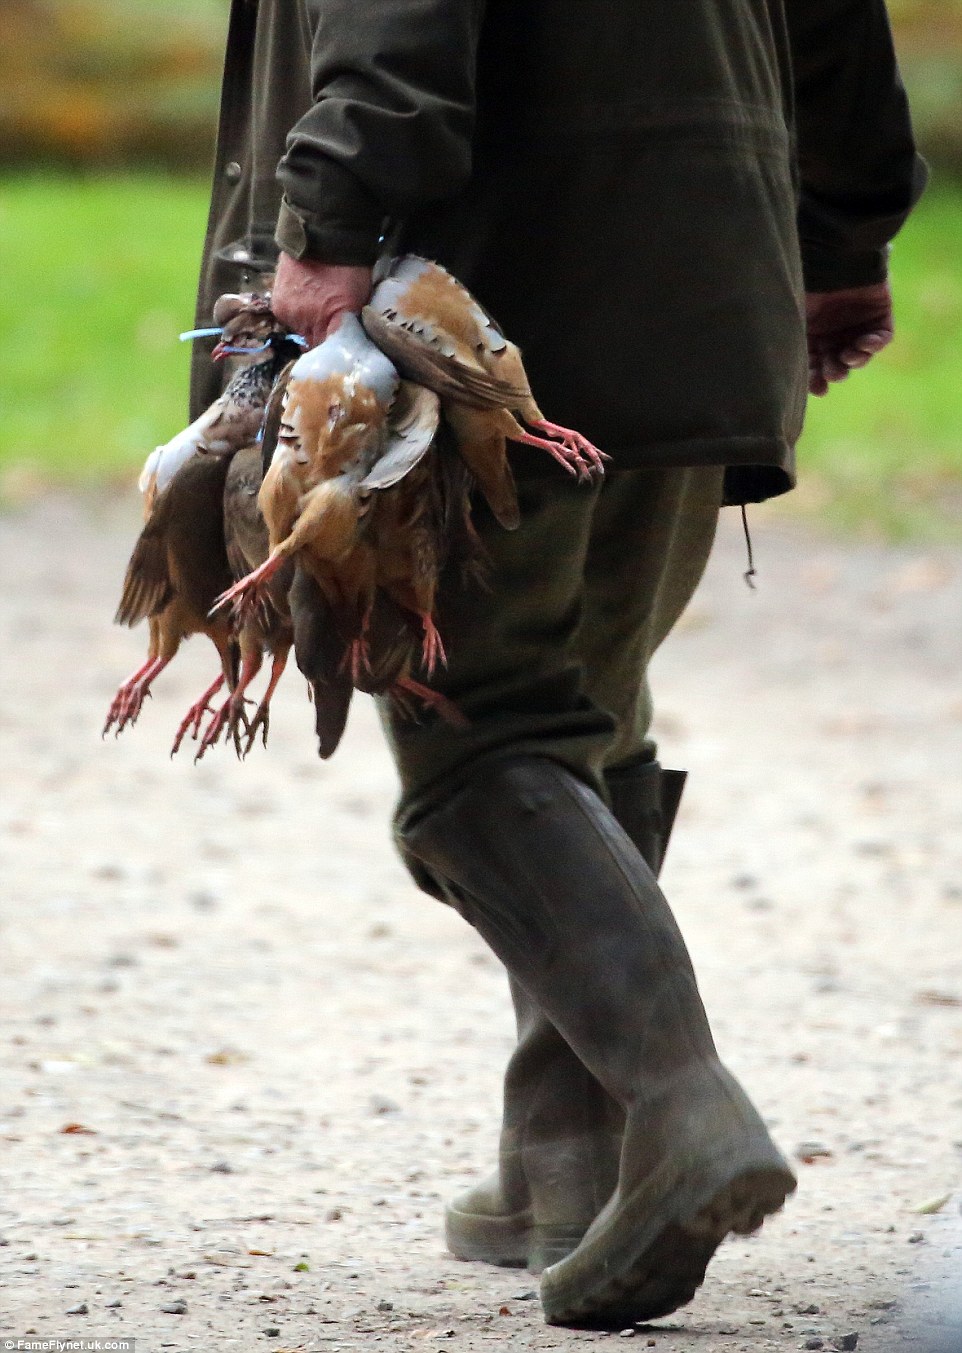 The result: One of the shooters was seen clutching shot partridges as their day out in the rolling hills drew to a close